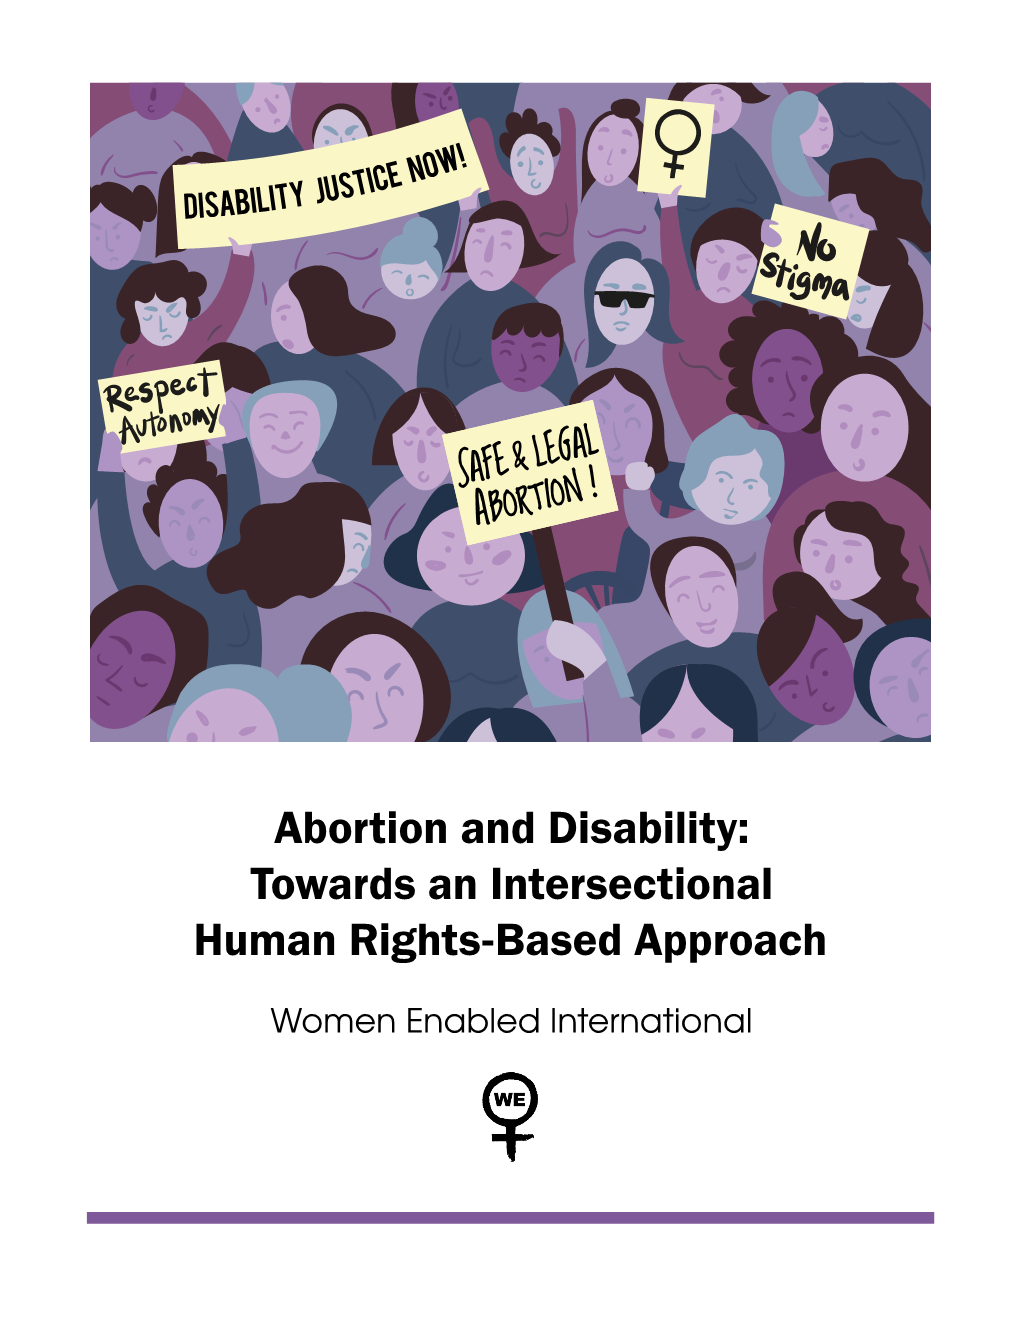 Abortion and Disability: Towards an Intersectional Human Rights-Based Approach